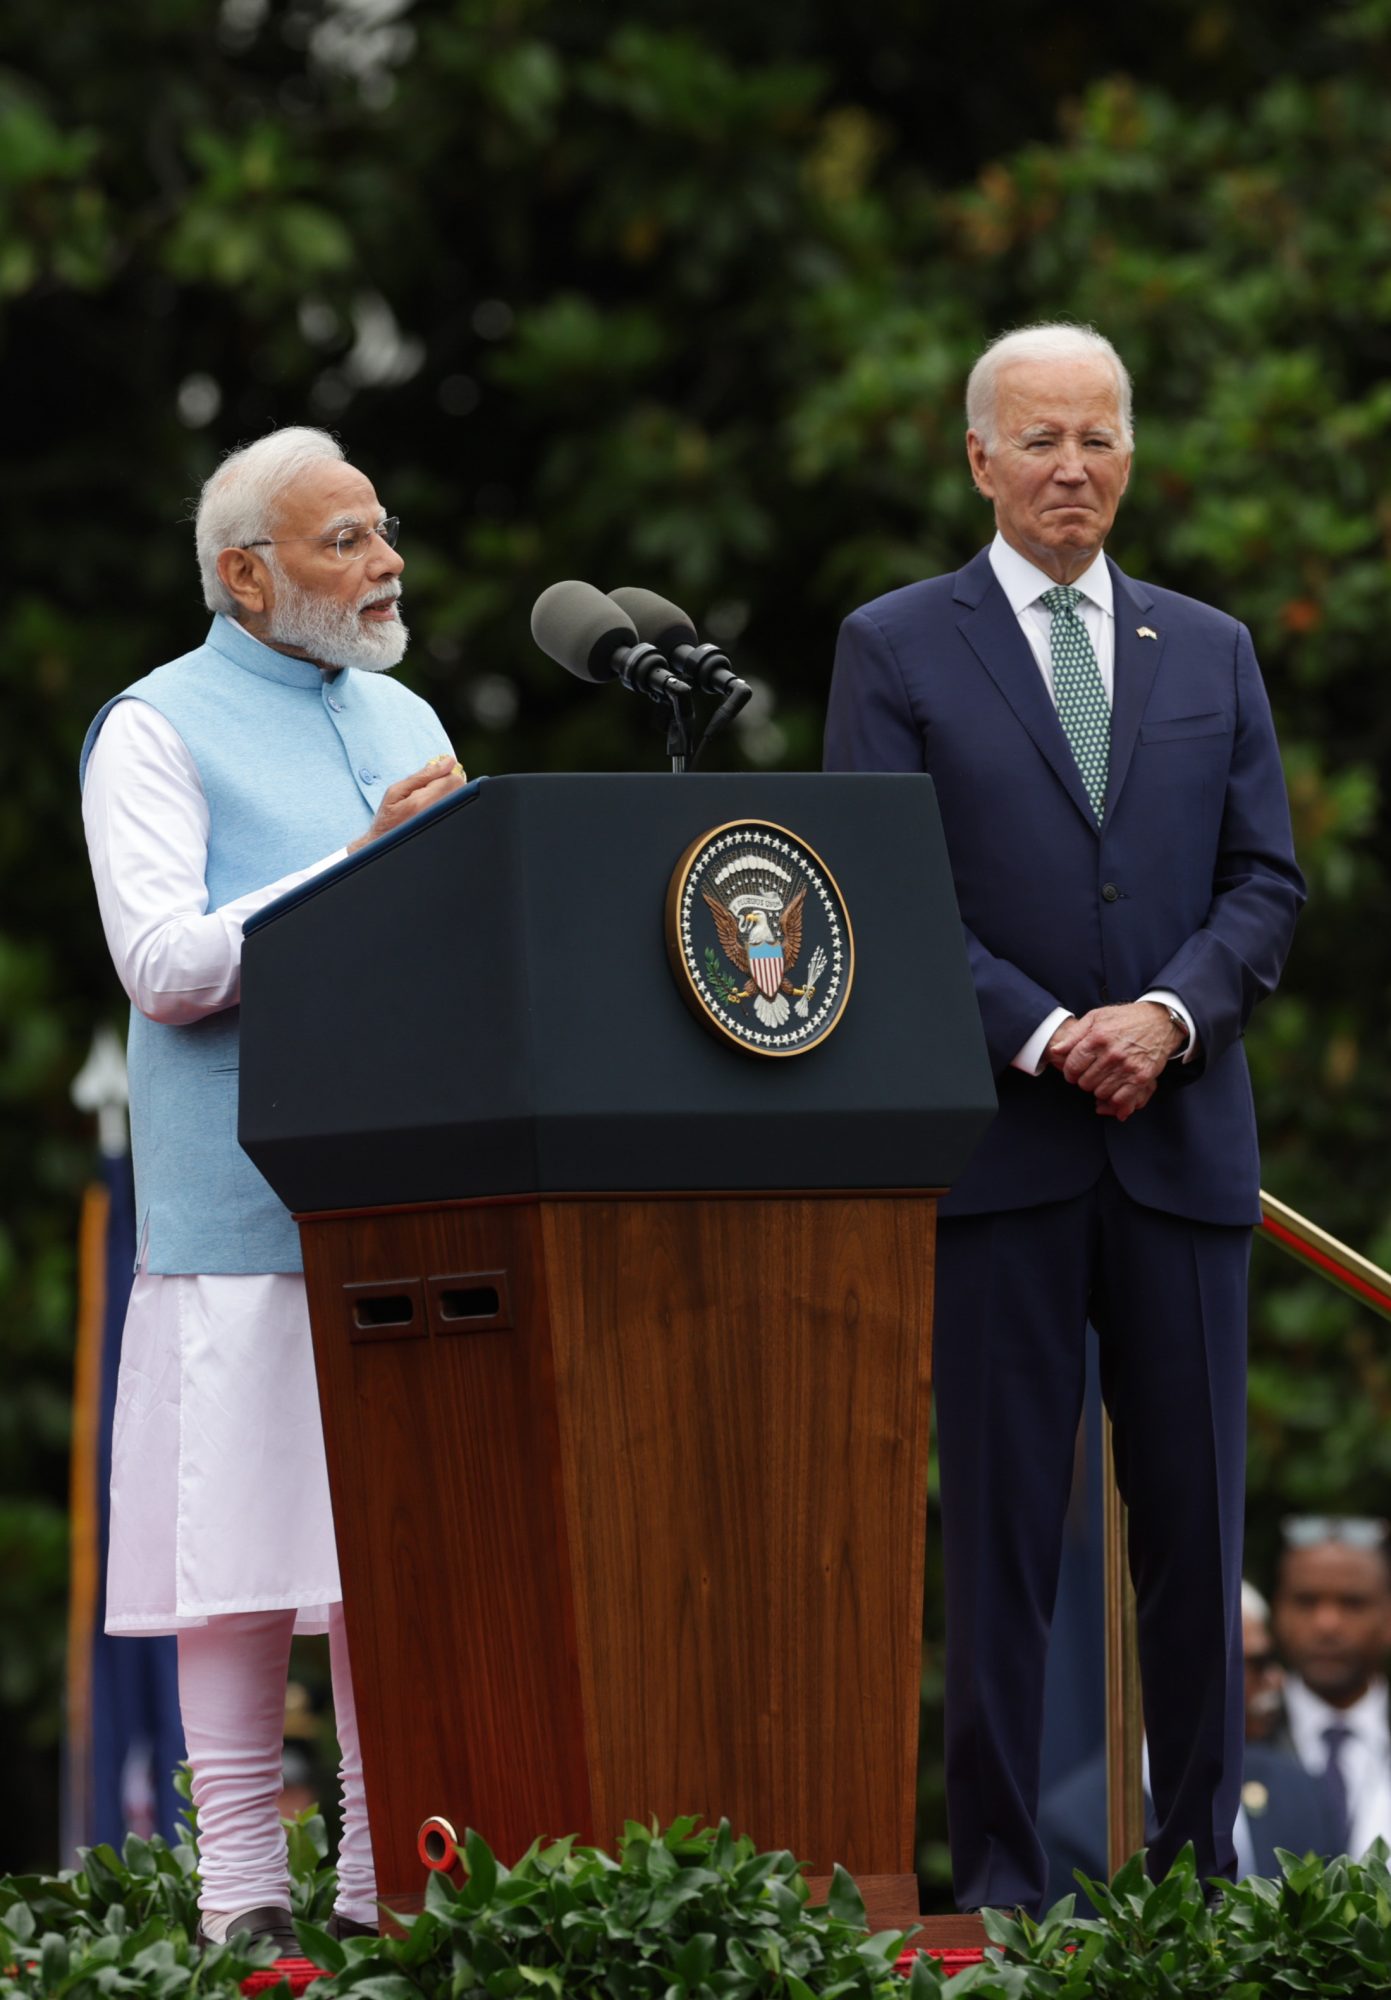 PM addressing the gathering at White House Arrival Ceremony, in Washington, D.C. on June 22, 2023.